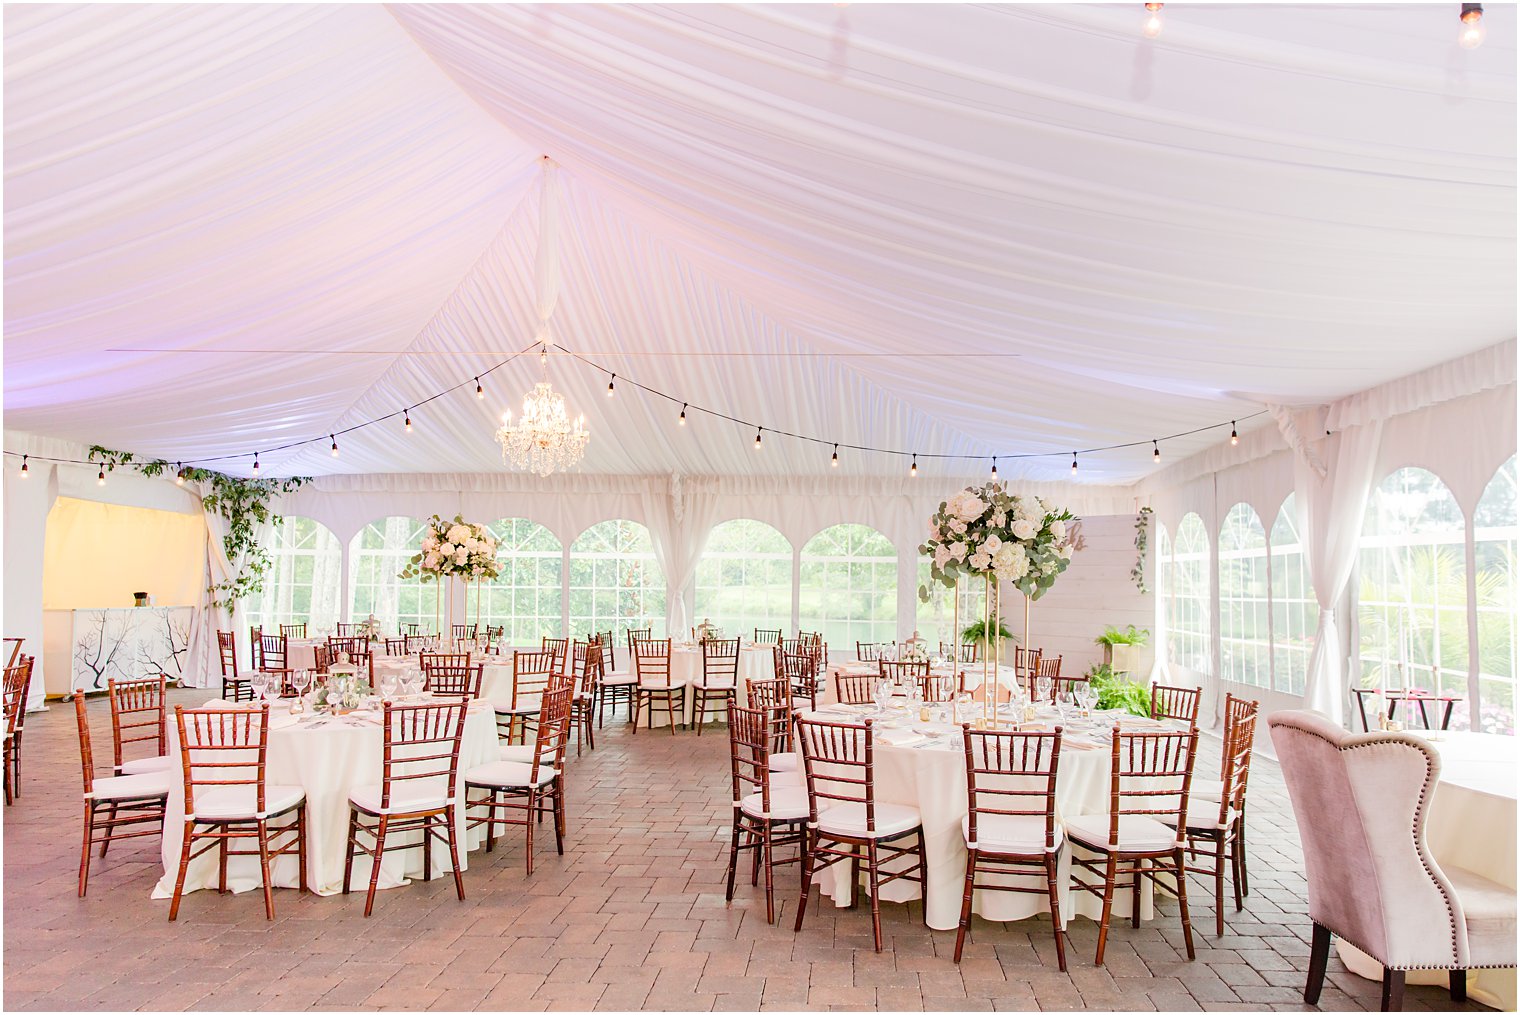 tented wedding reception with white floral centerpieces at Windows on the Water at Frogbridge